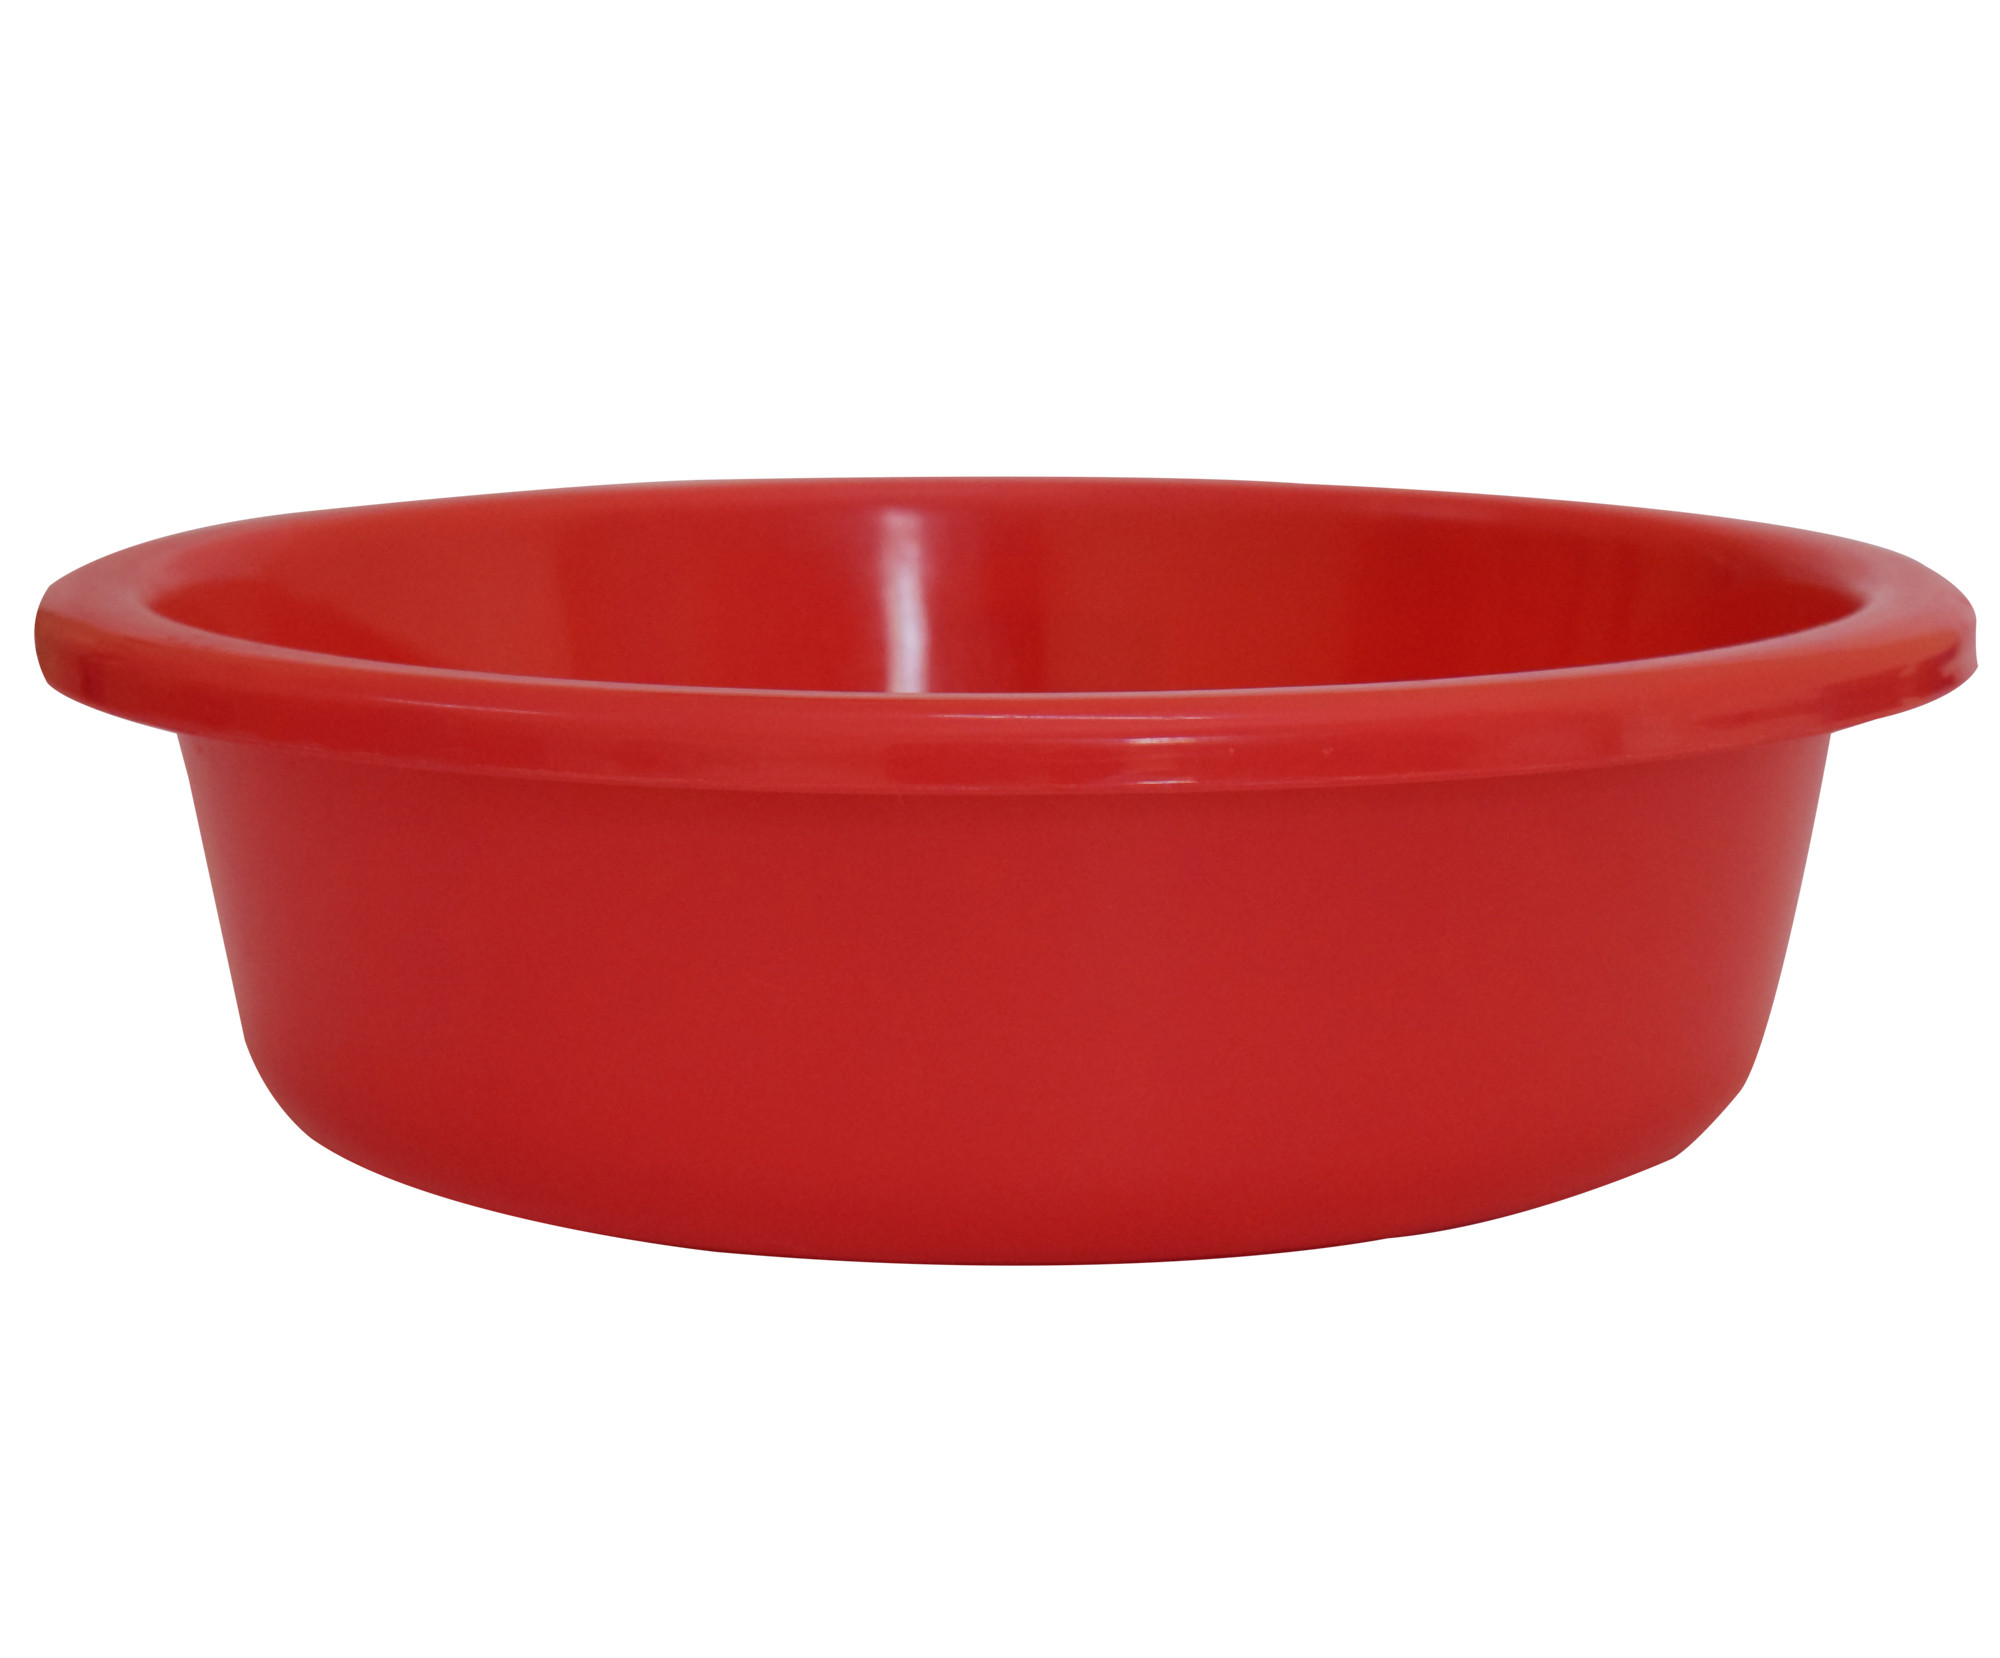 Kuber Industries Multiuses Unbreakable Plastic Knead Dough Basket/Basin Bowl For Home & Kitchen 6 Ltr- Pack of 2 (Red & Grey)